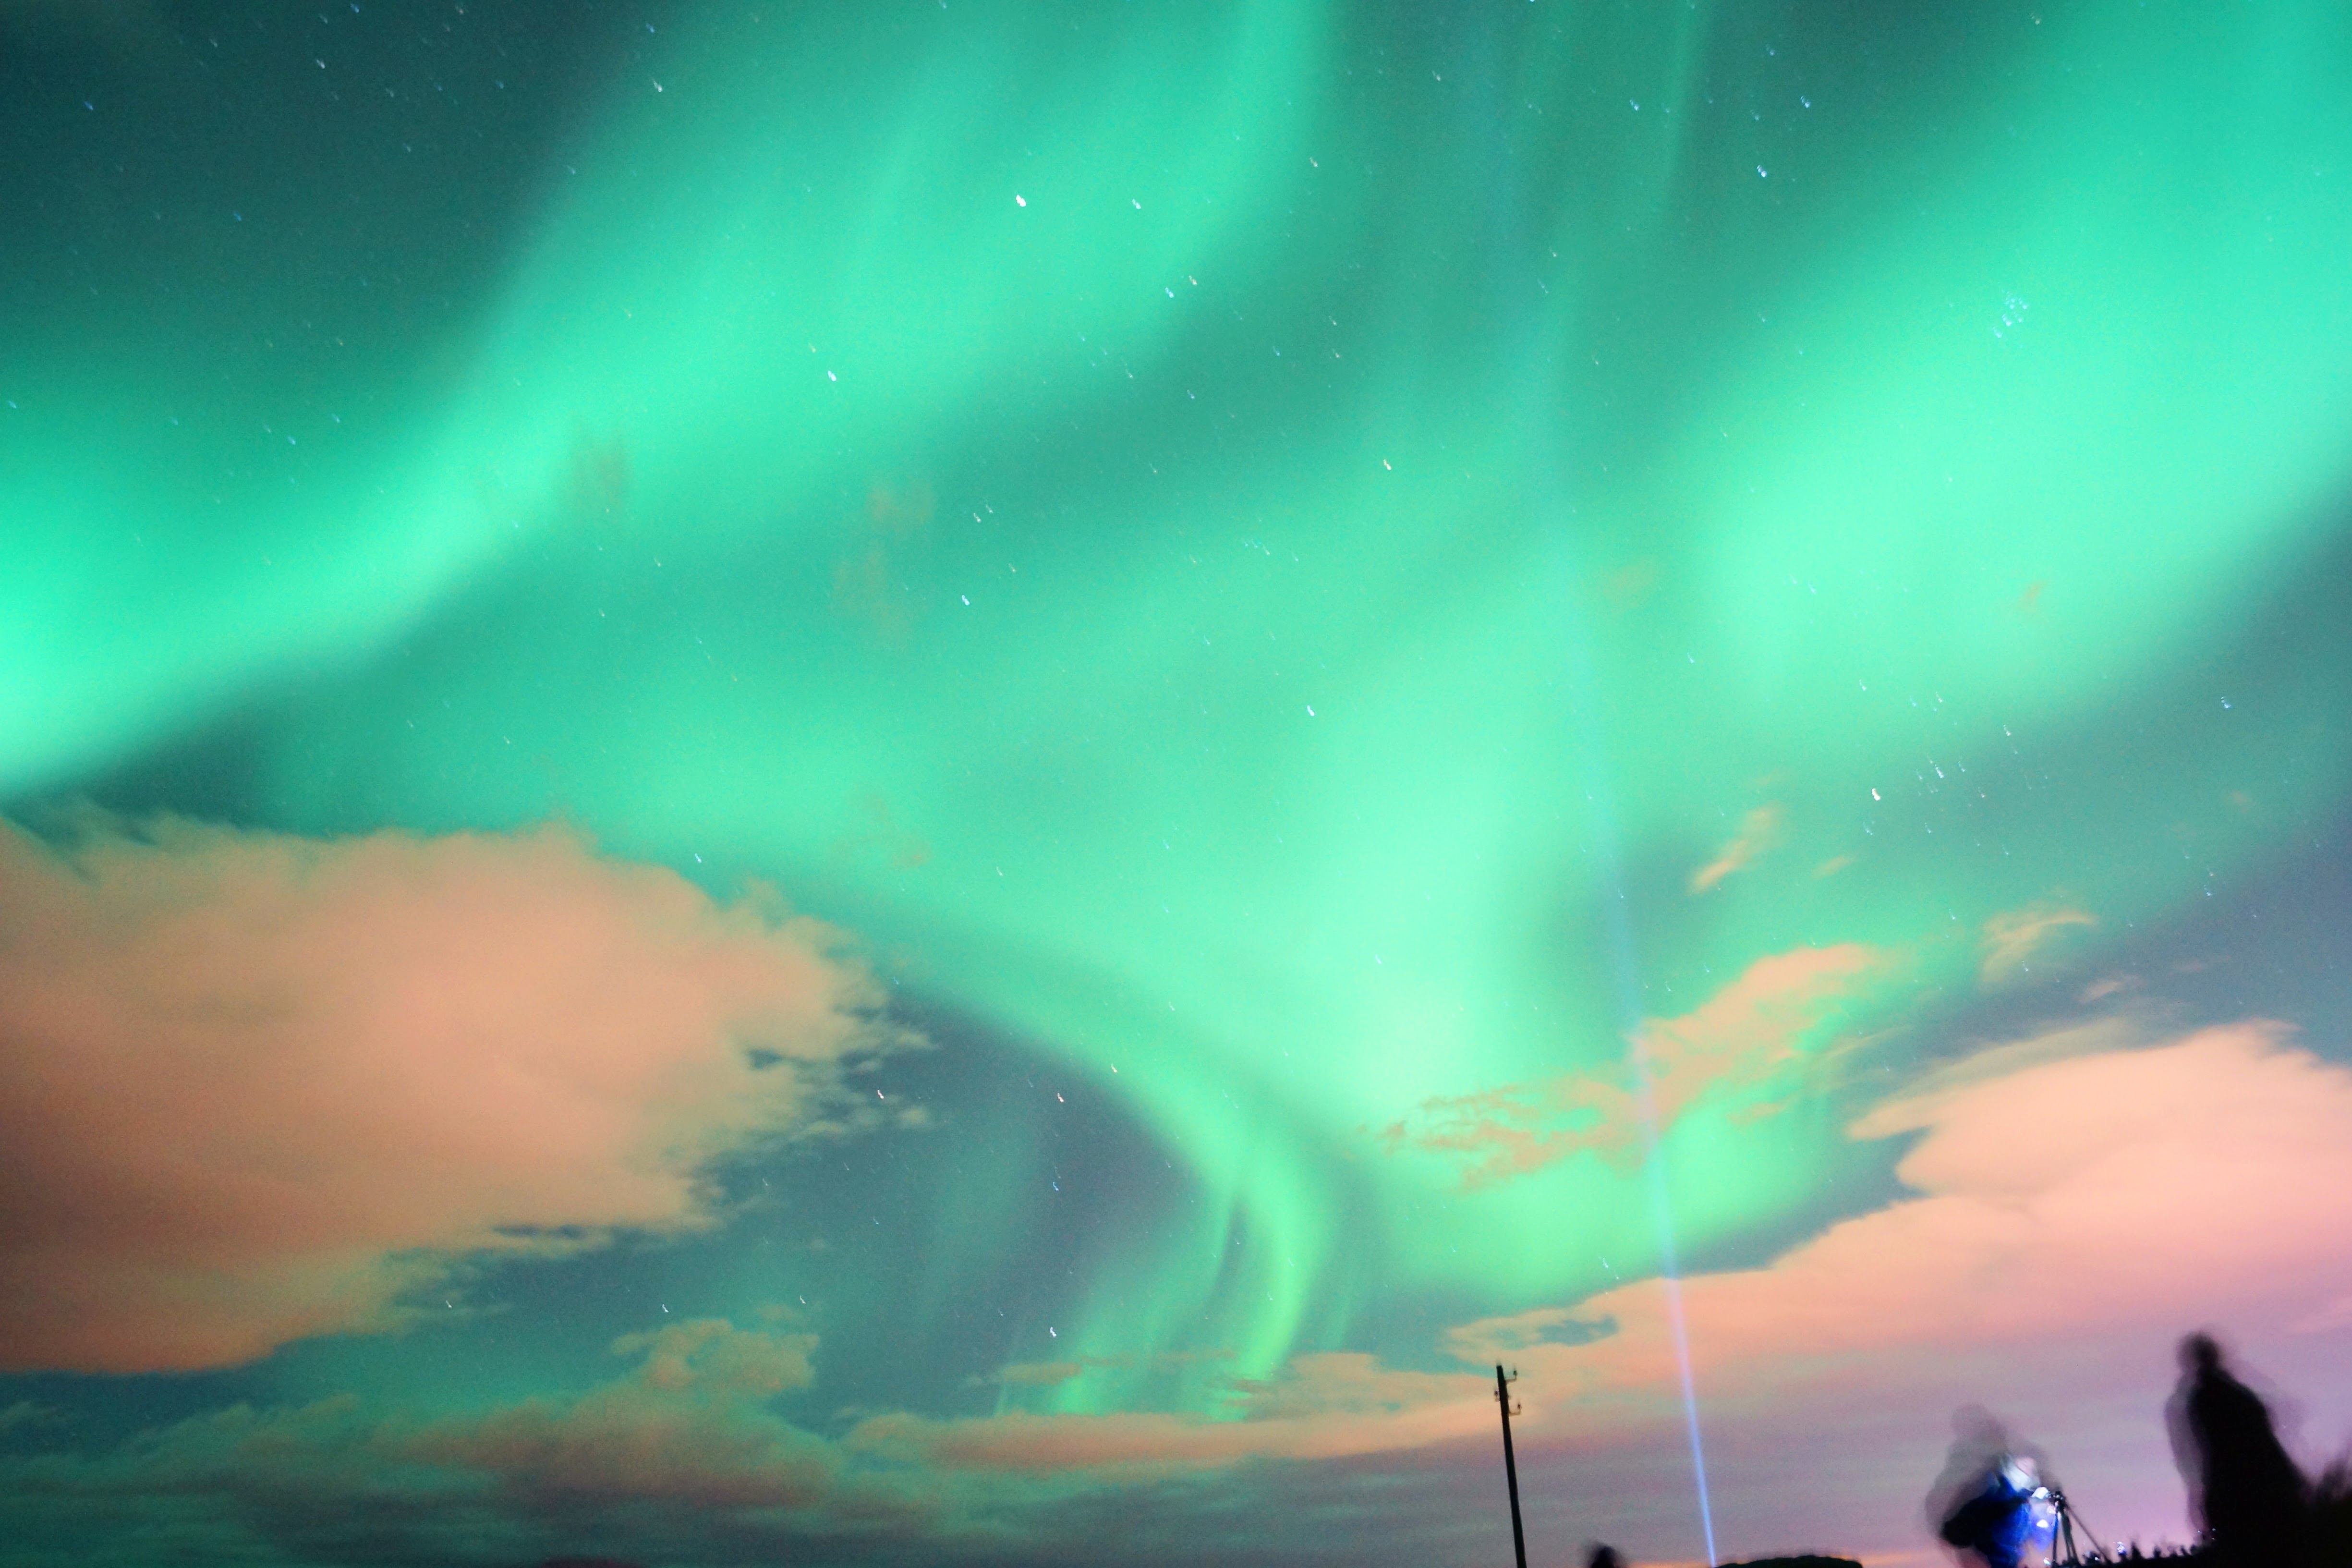 Sky filled with northern lights